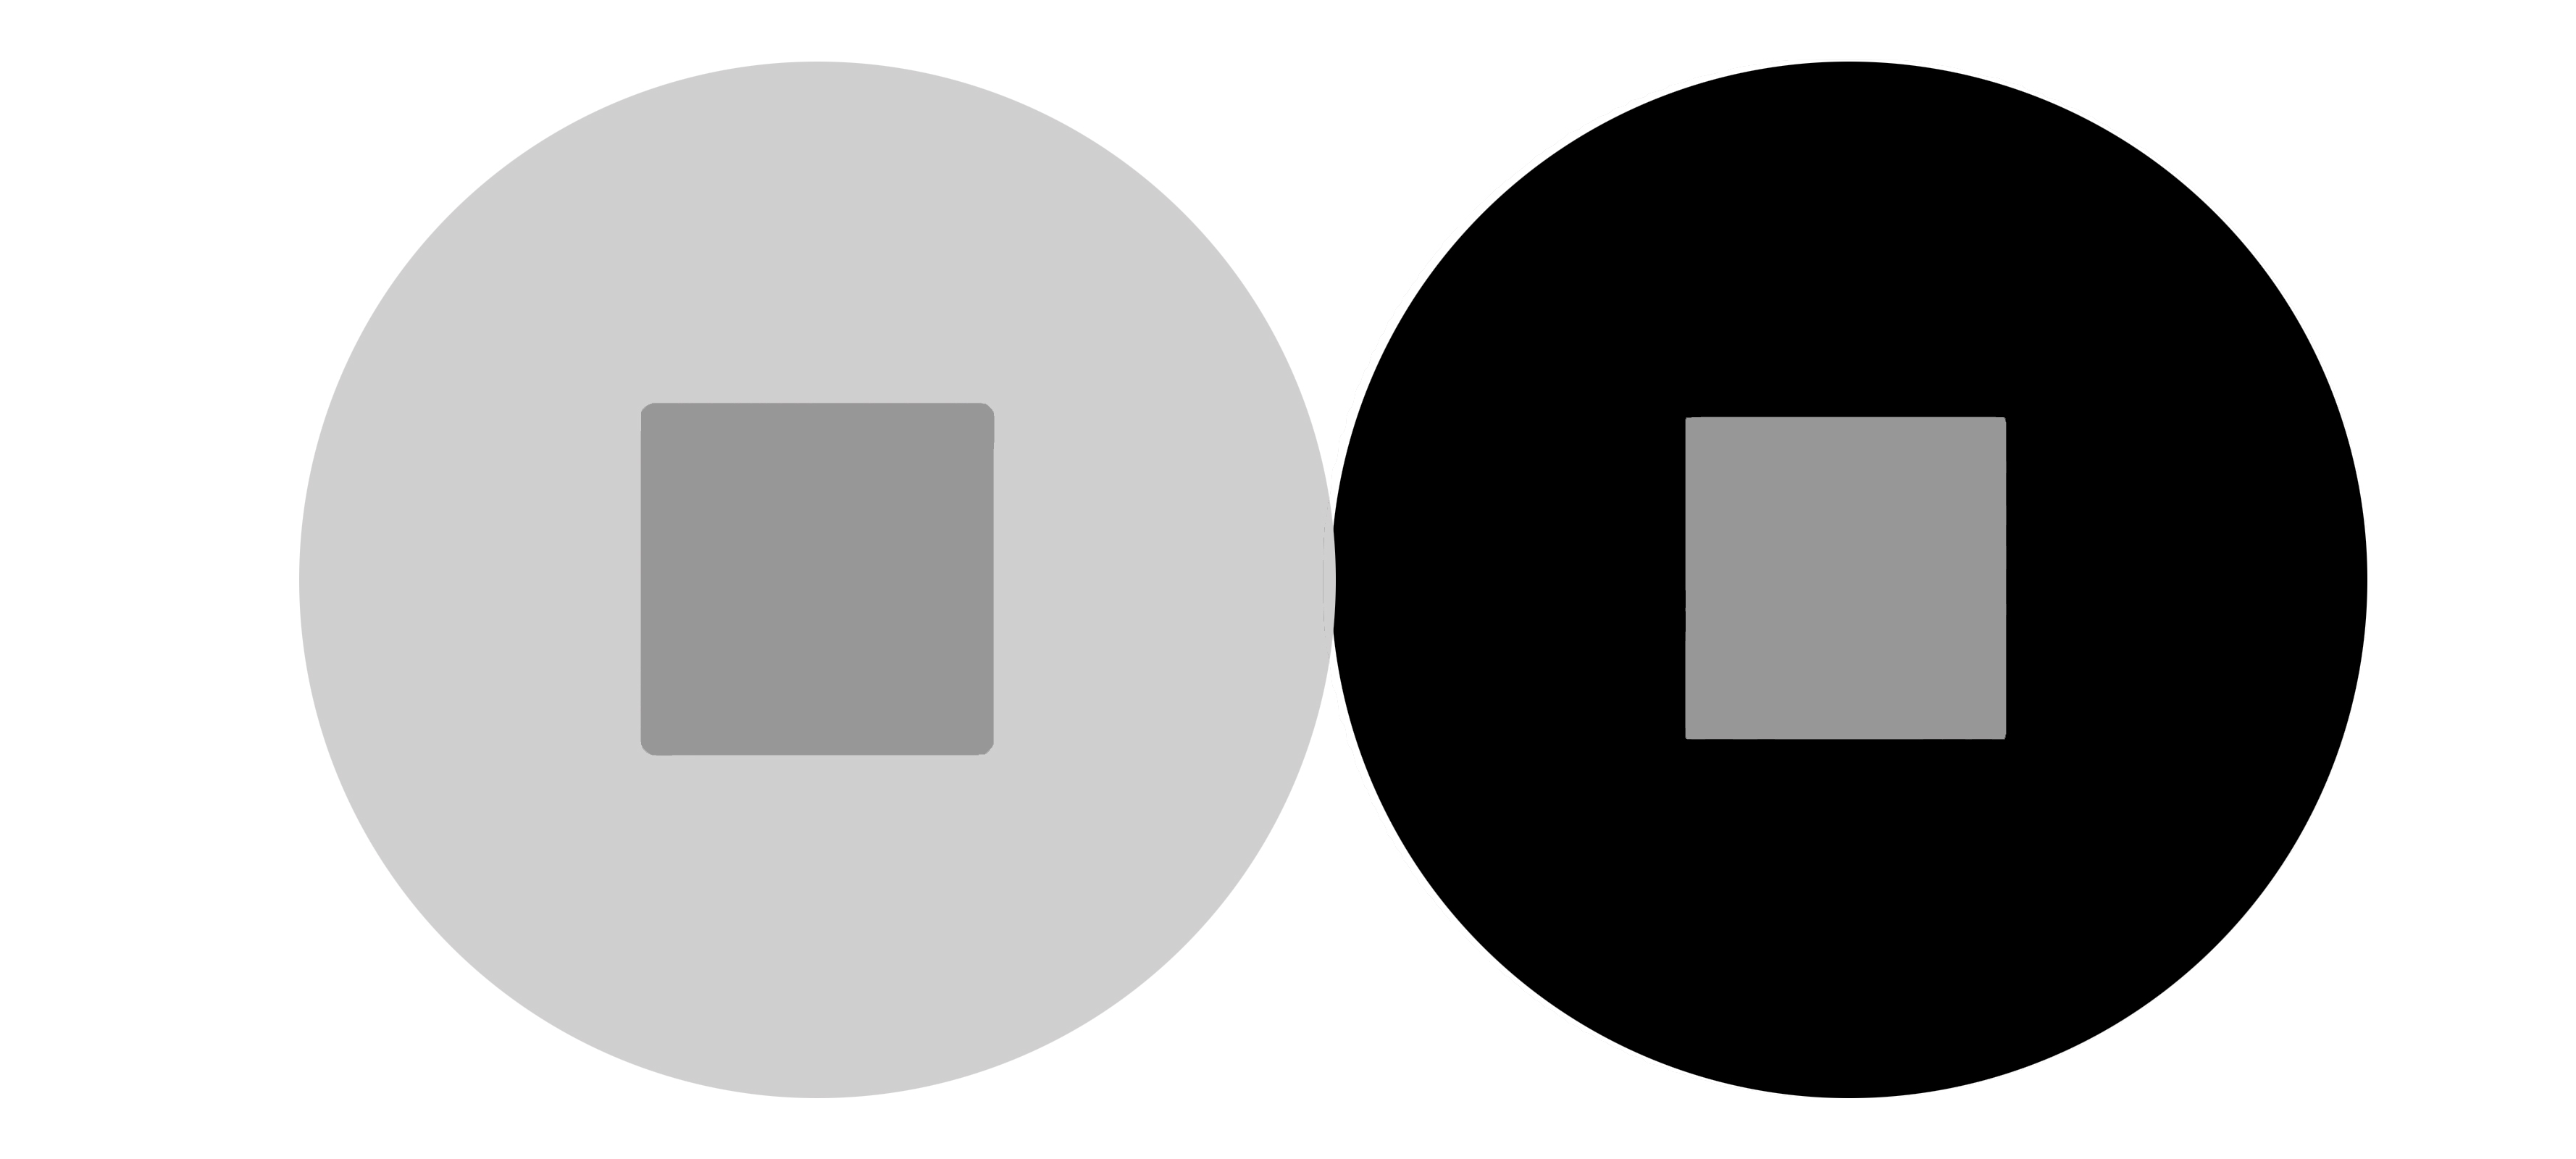 Graphic of a contrast test